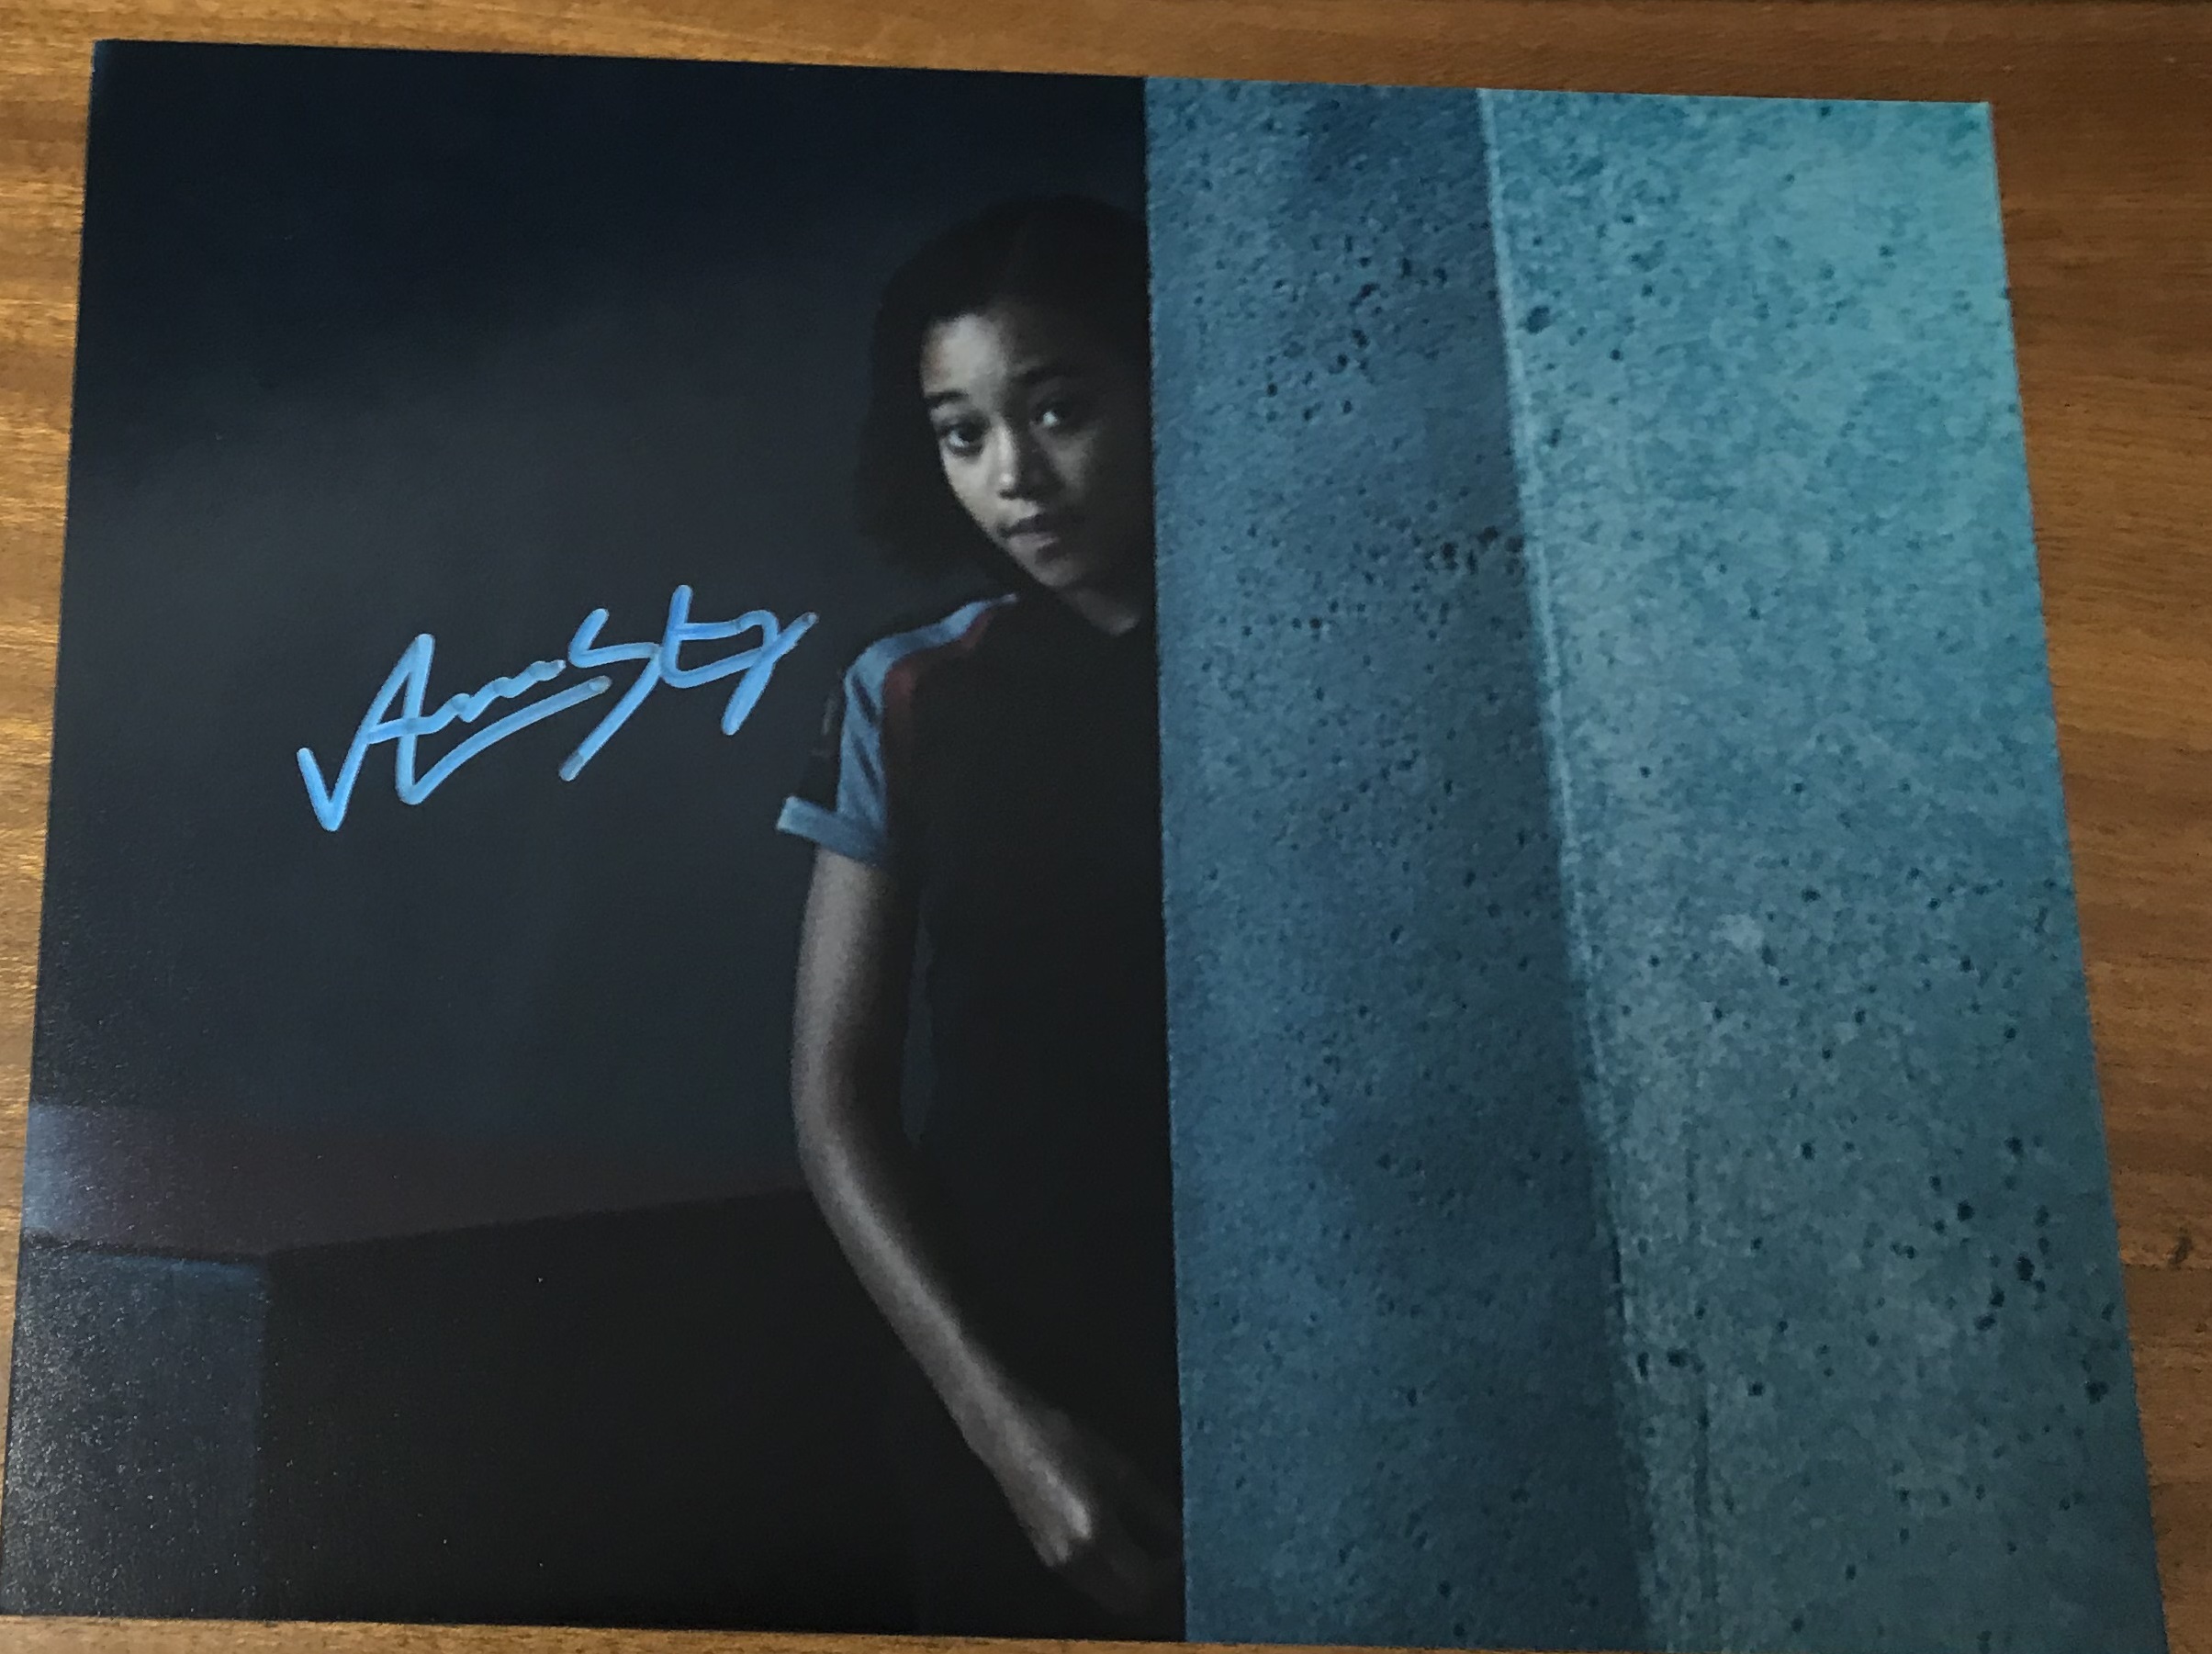 Amandla Stenberg Signed 10x8 Colour Photo. Good condition. All autographs come with a Certificate of